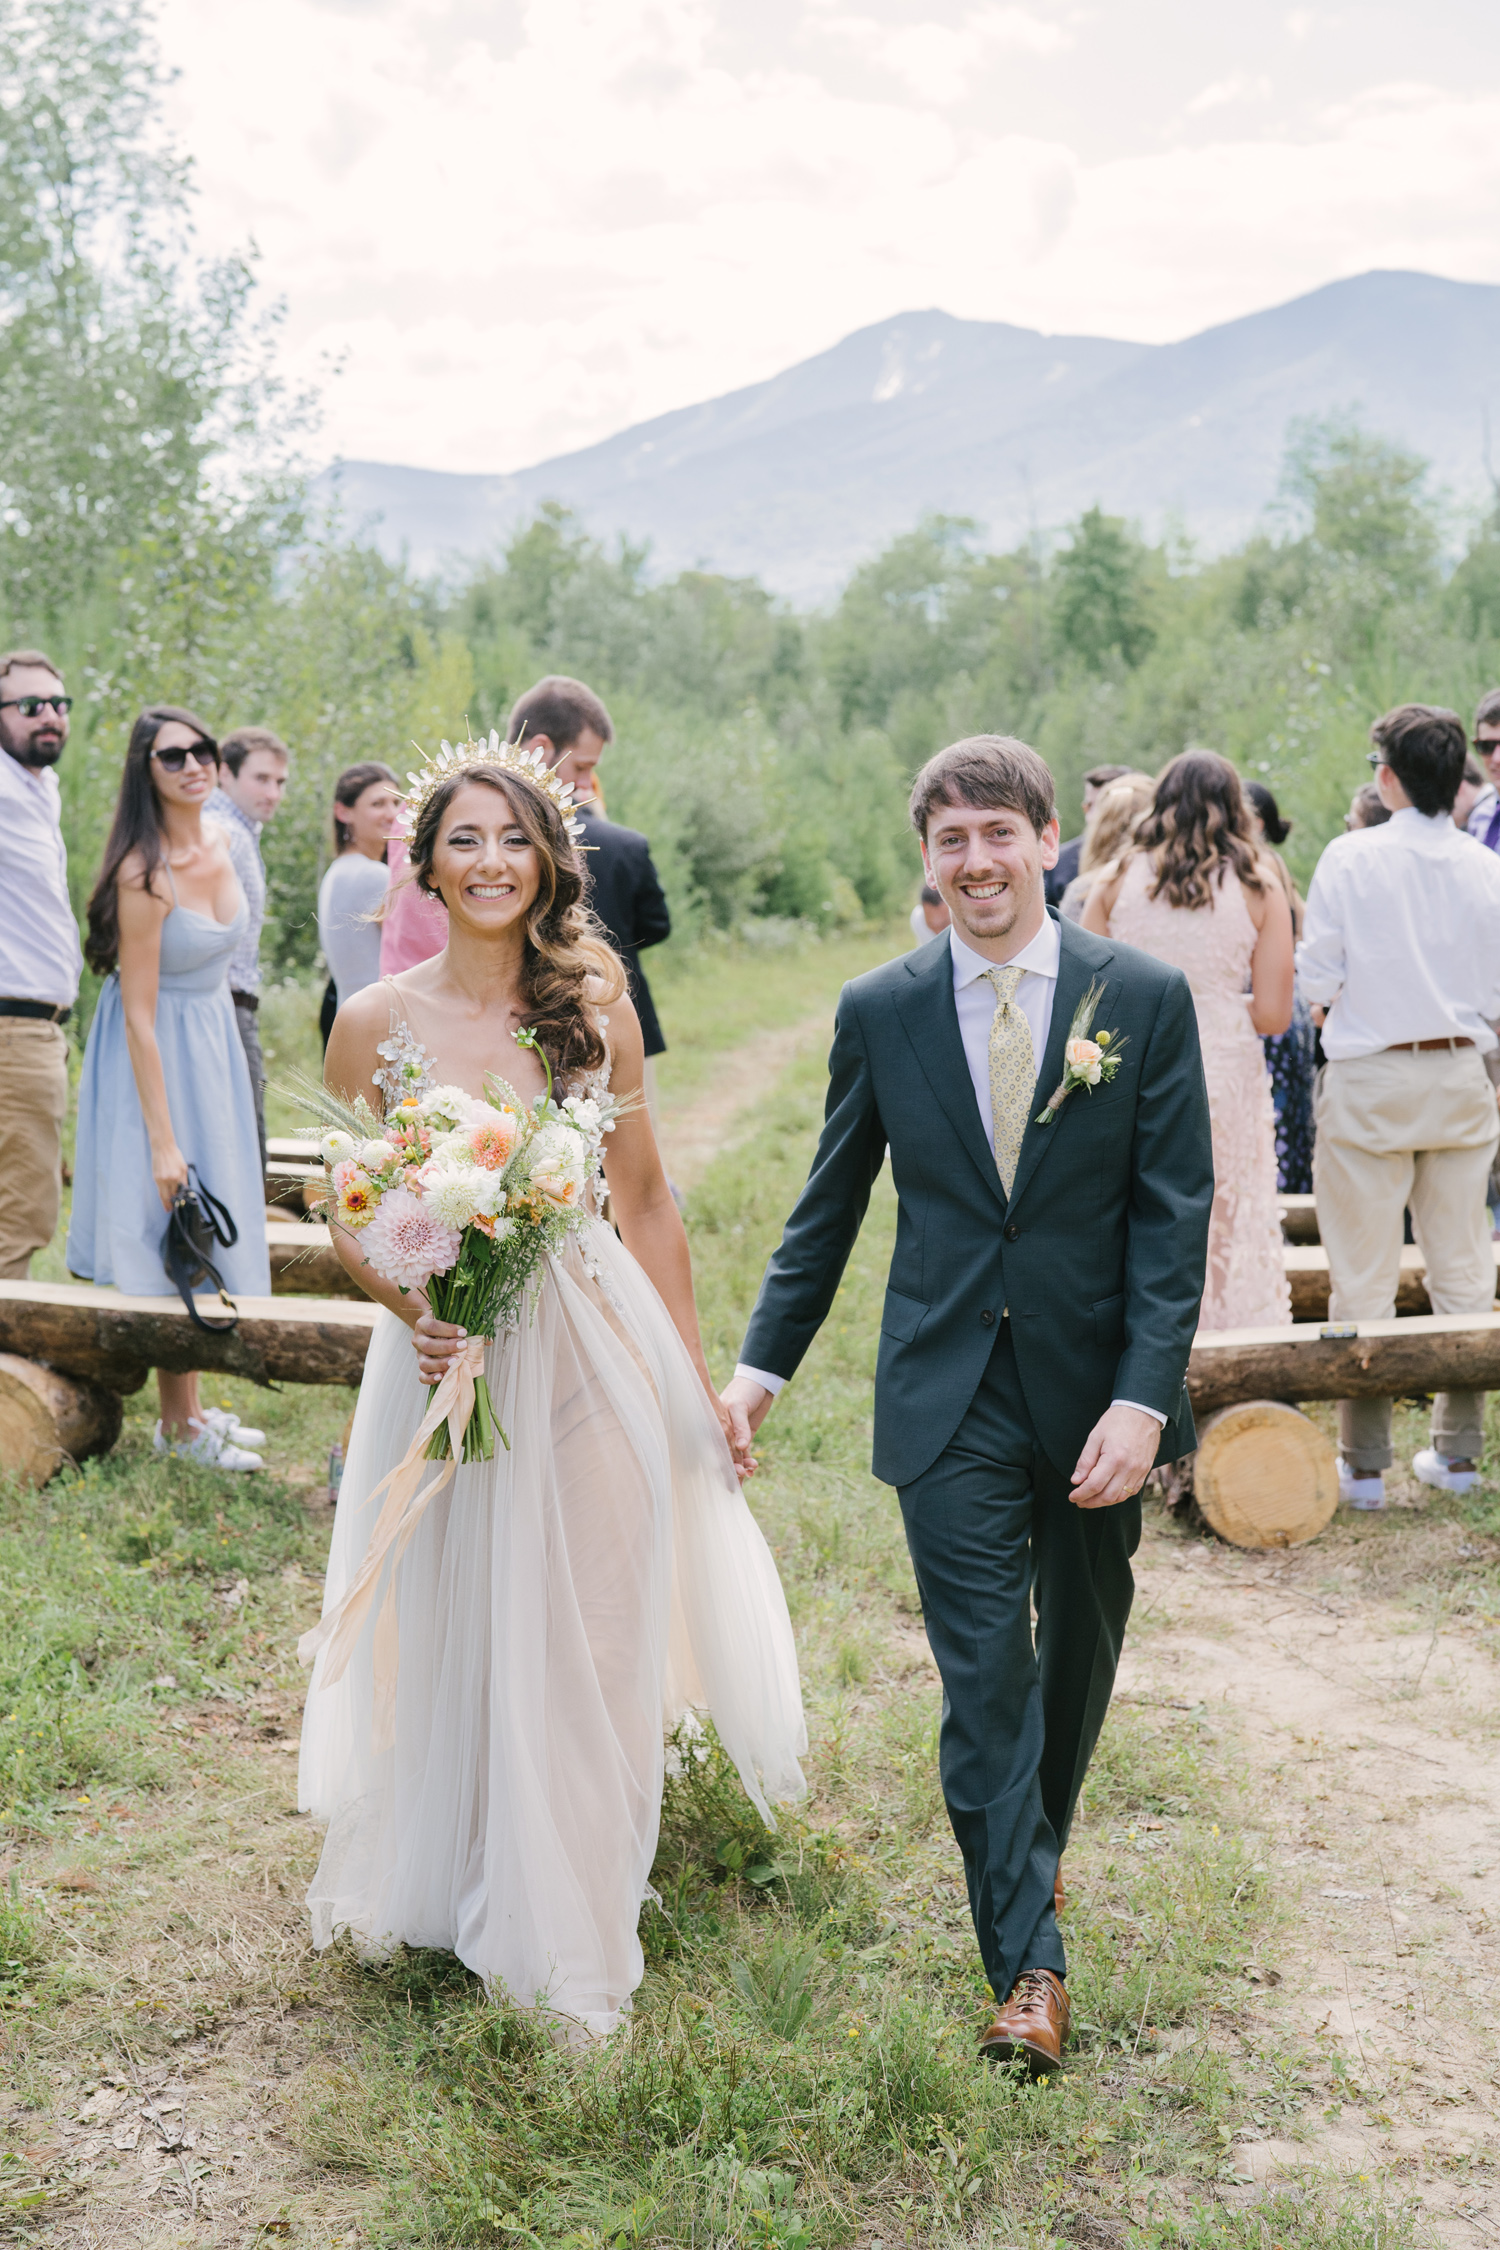 Adirondack Mountain Wedding | A Lake Placid Wedding with Whiteface Mountain. Luxury Bridal fashion and laid back elegance make this mountain wedding one to remember. Photographed by Mary Dougherty